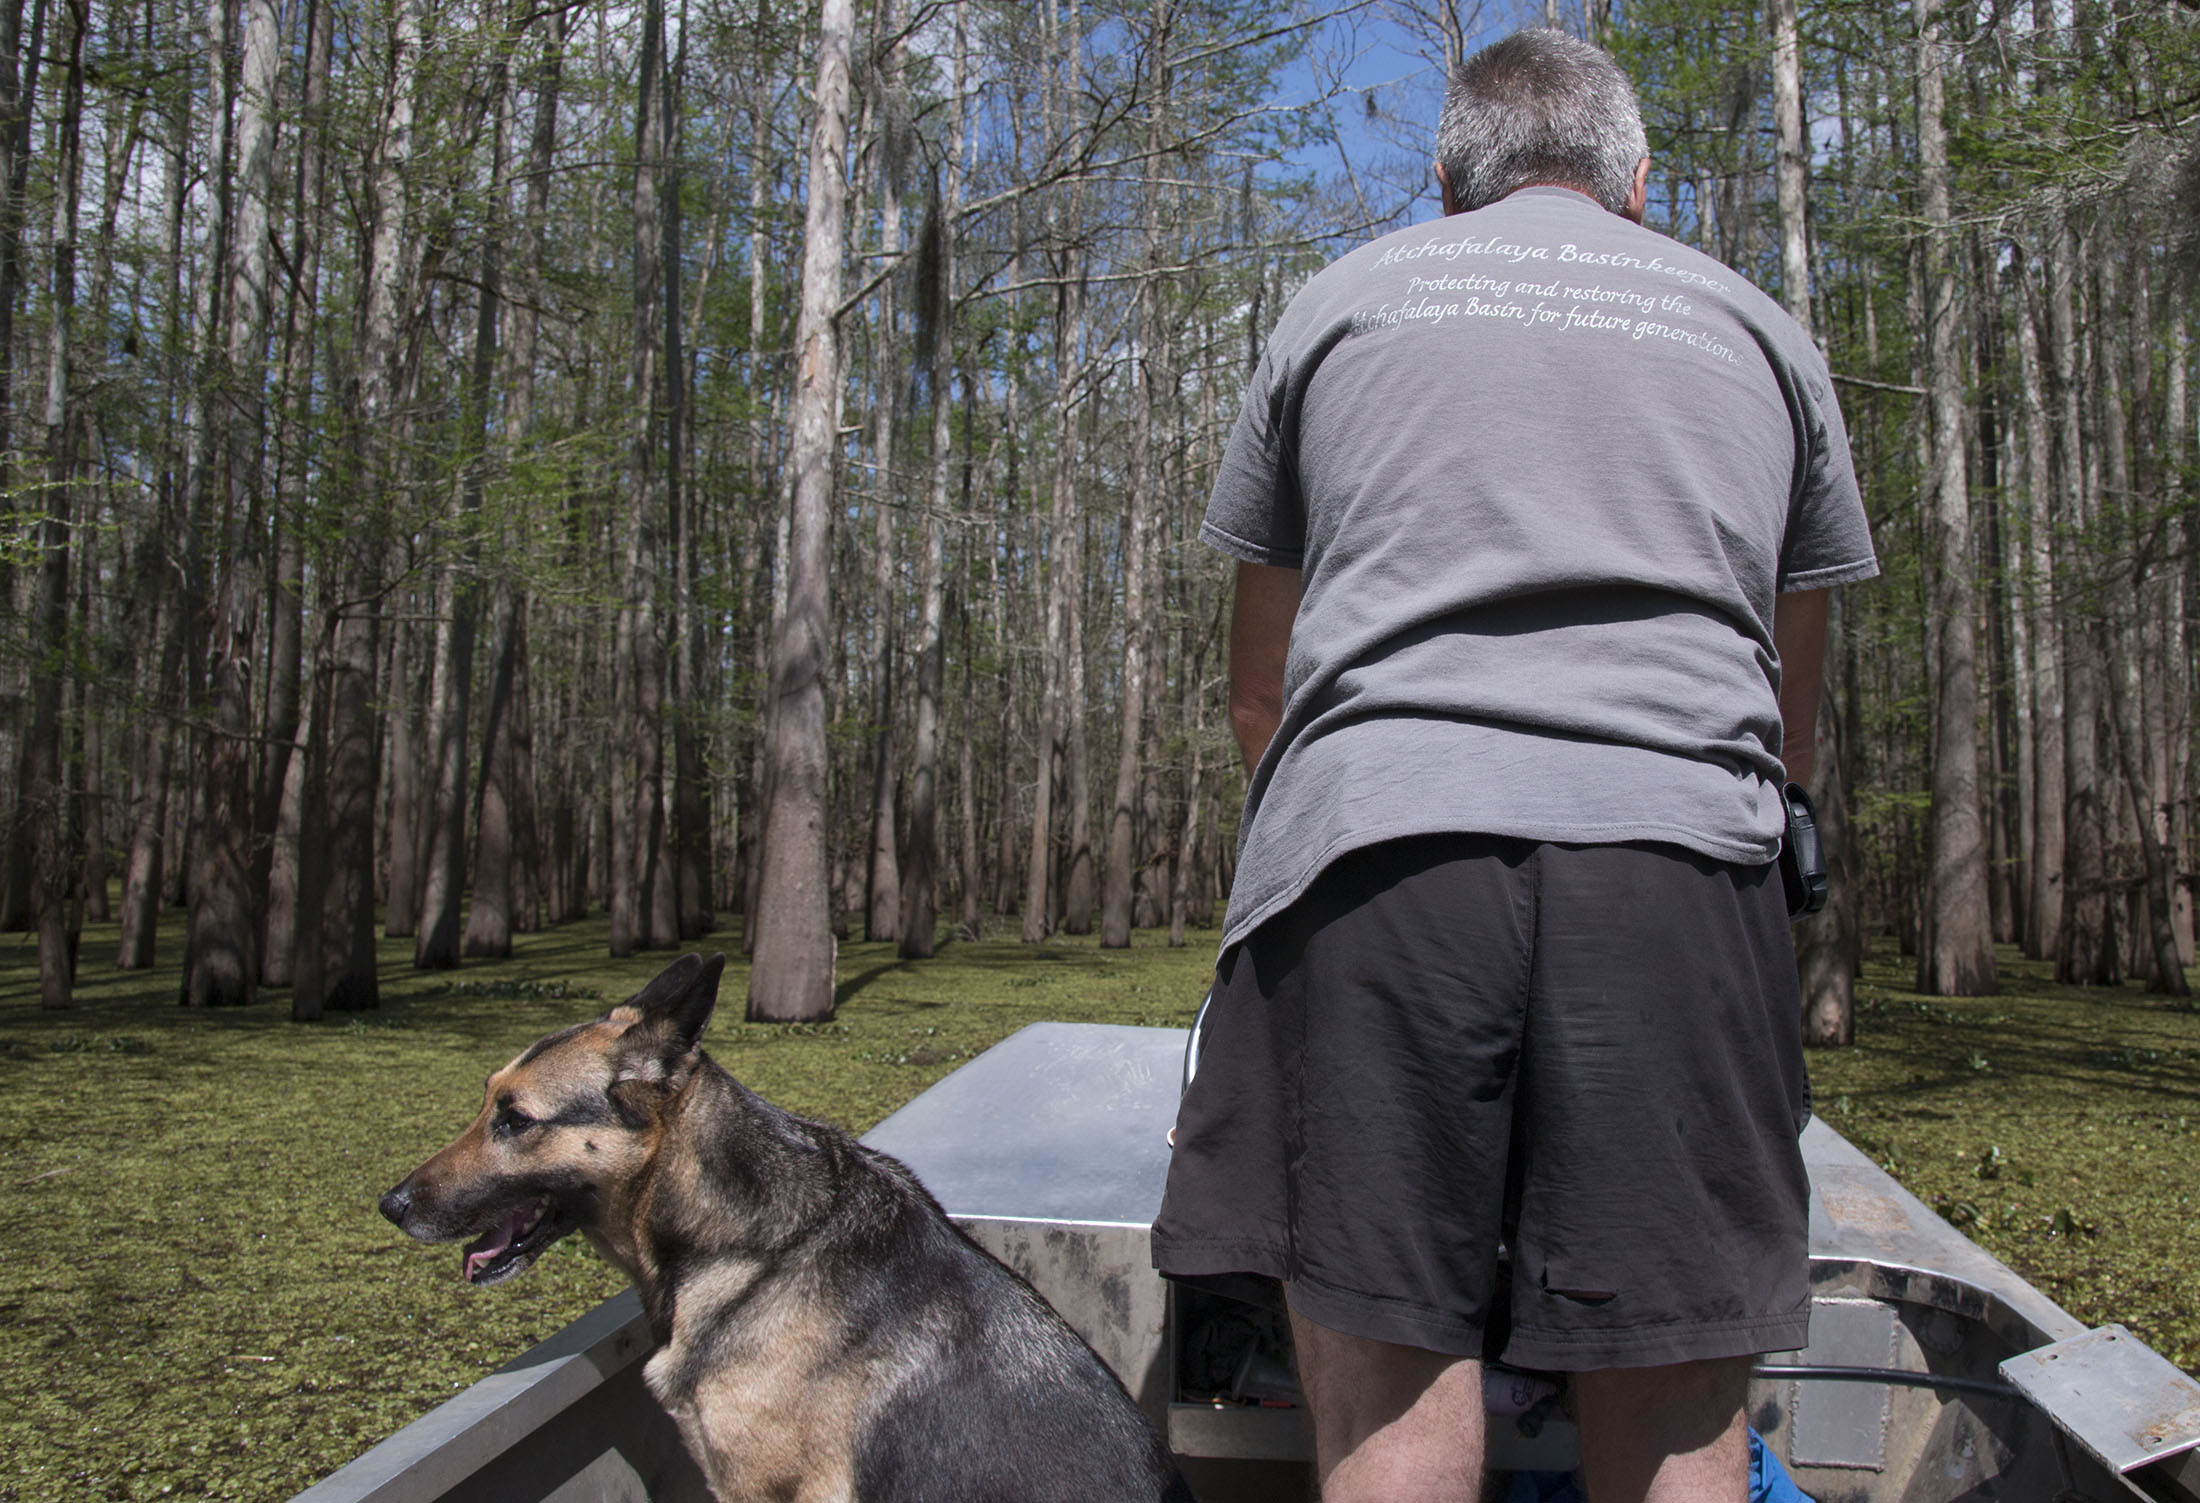 Dean Wilson was a commercial fisherman before companies began logging in the basin. Now he works to raise awareness and fight destruction of the swamp ecosystem through Atchafalaya Basinkeeper.